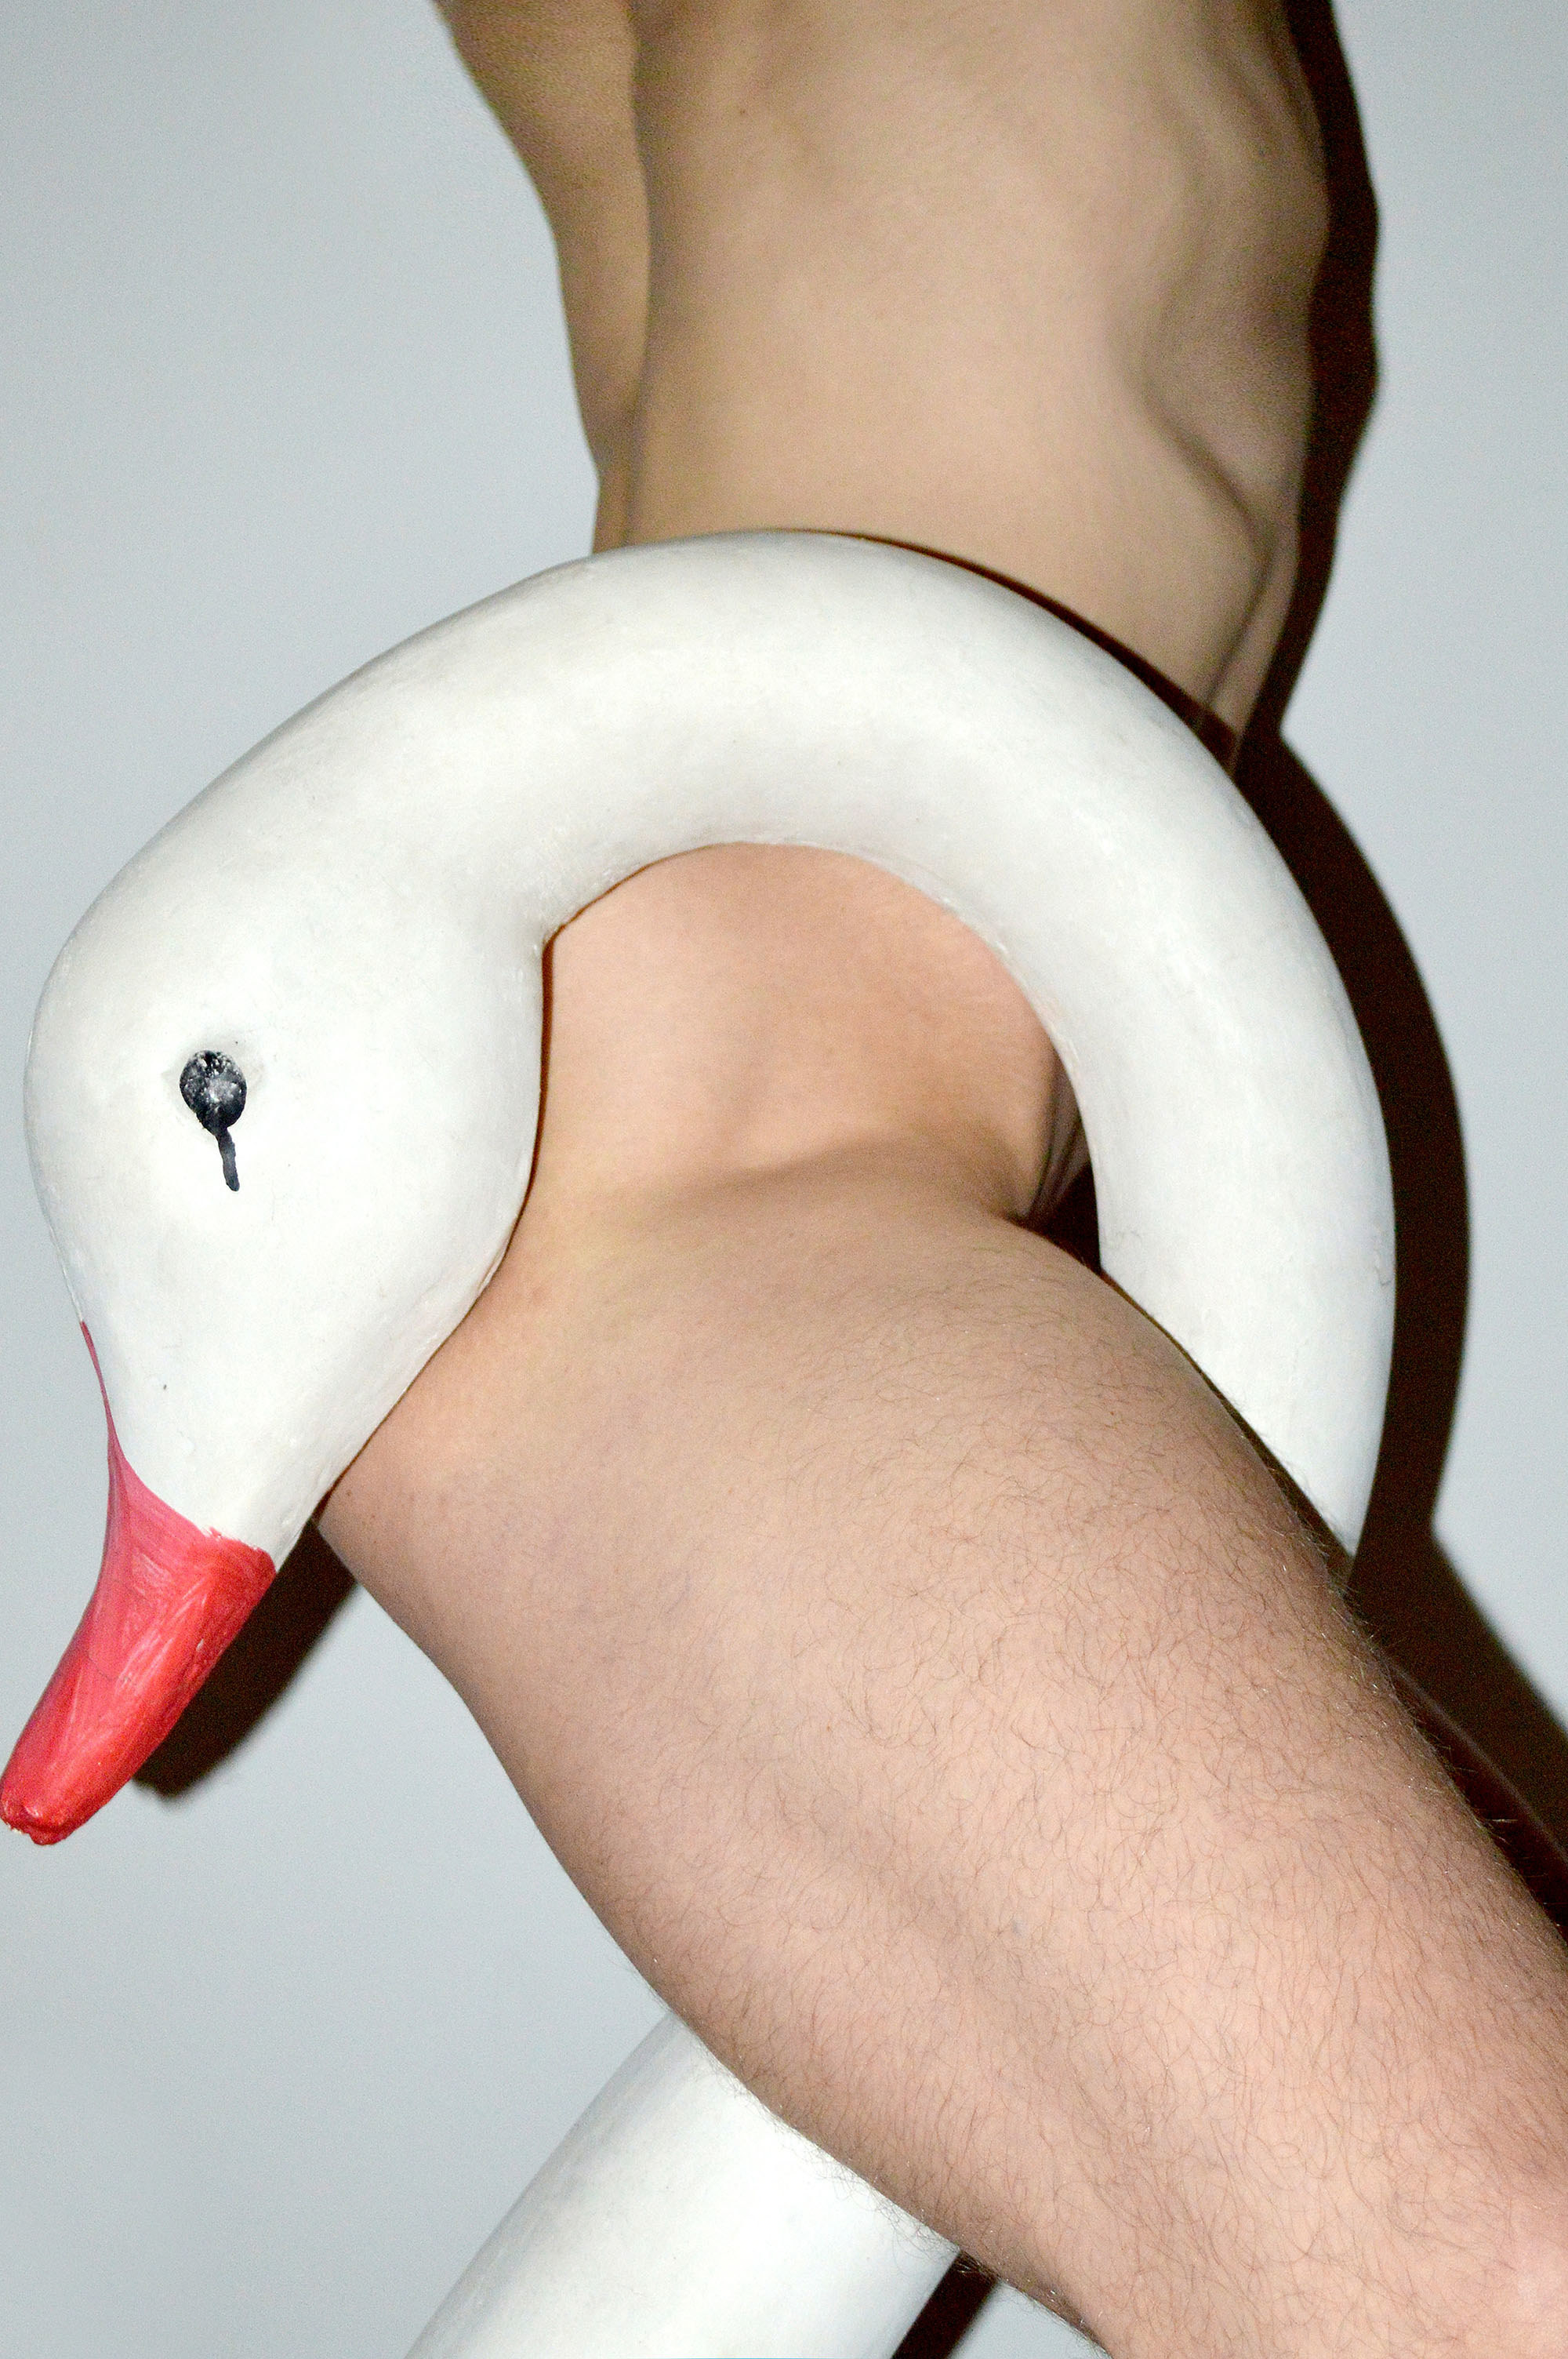 A naked man rides a plastic swan&#x27;s neck